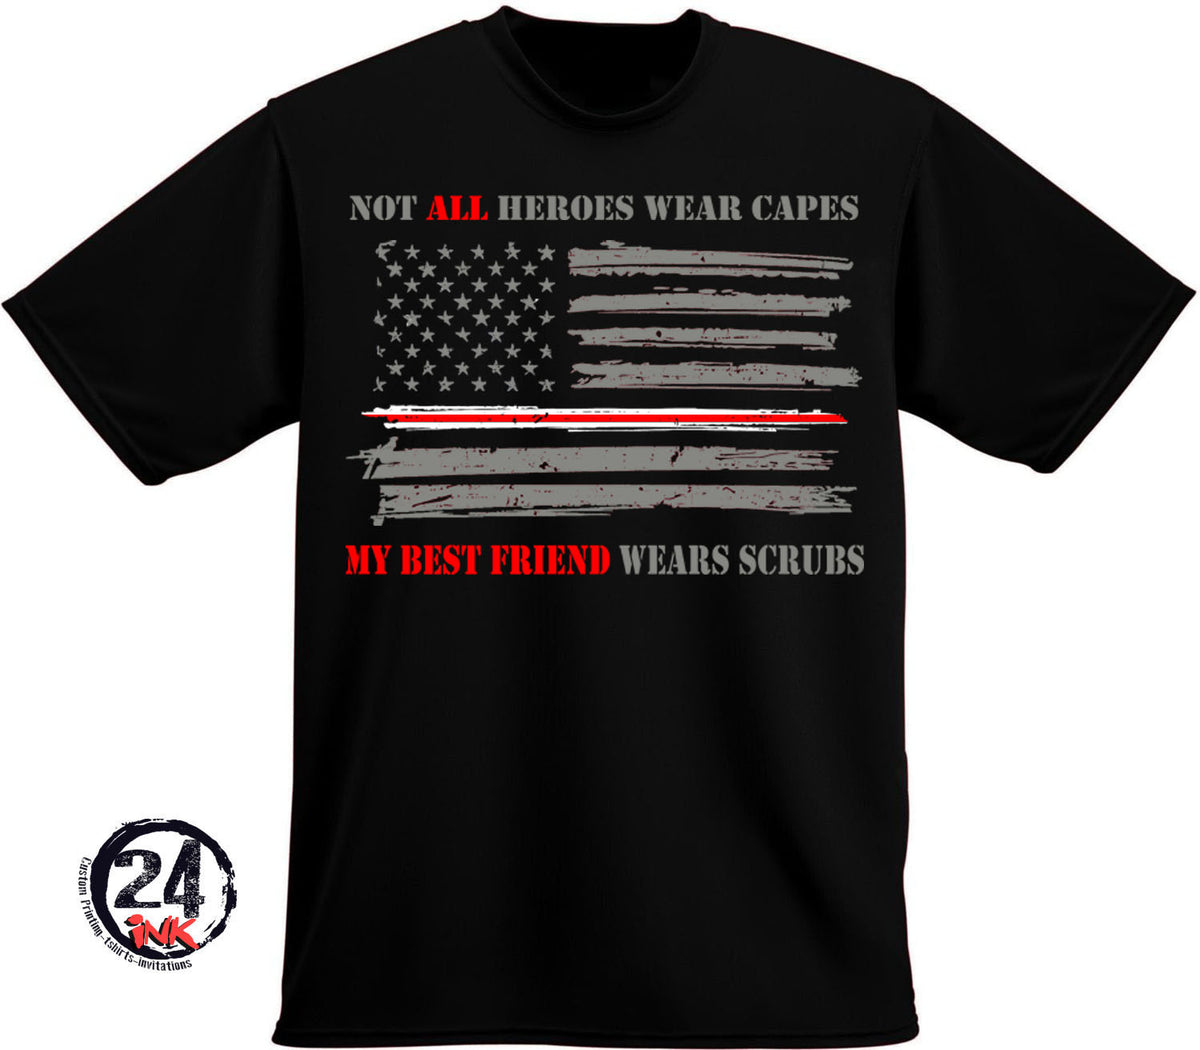 Not all heroes wear capes T-shirt, Nurses, Doctors, Vernon Strong